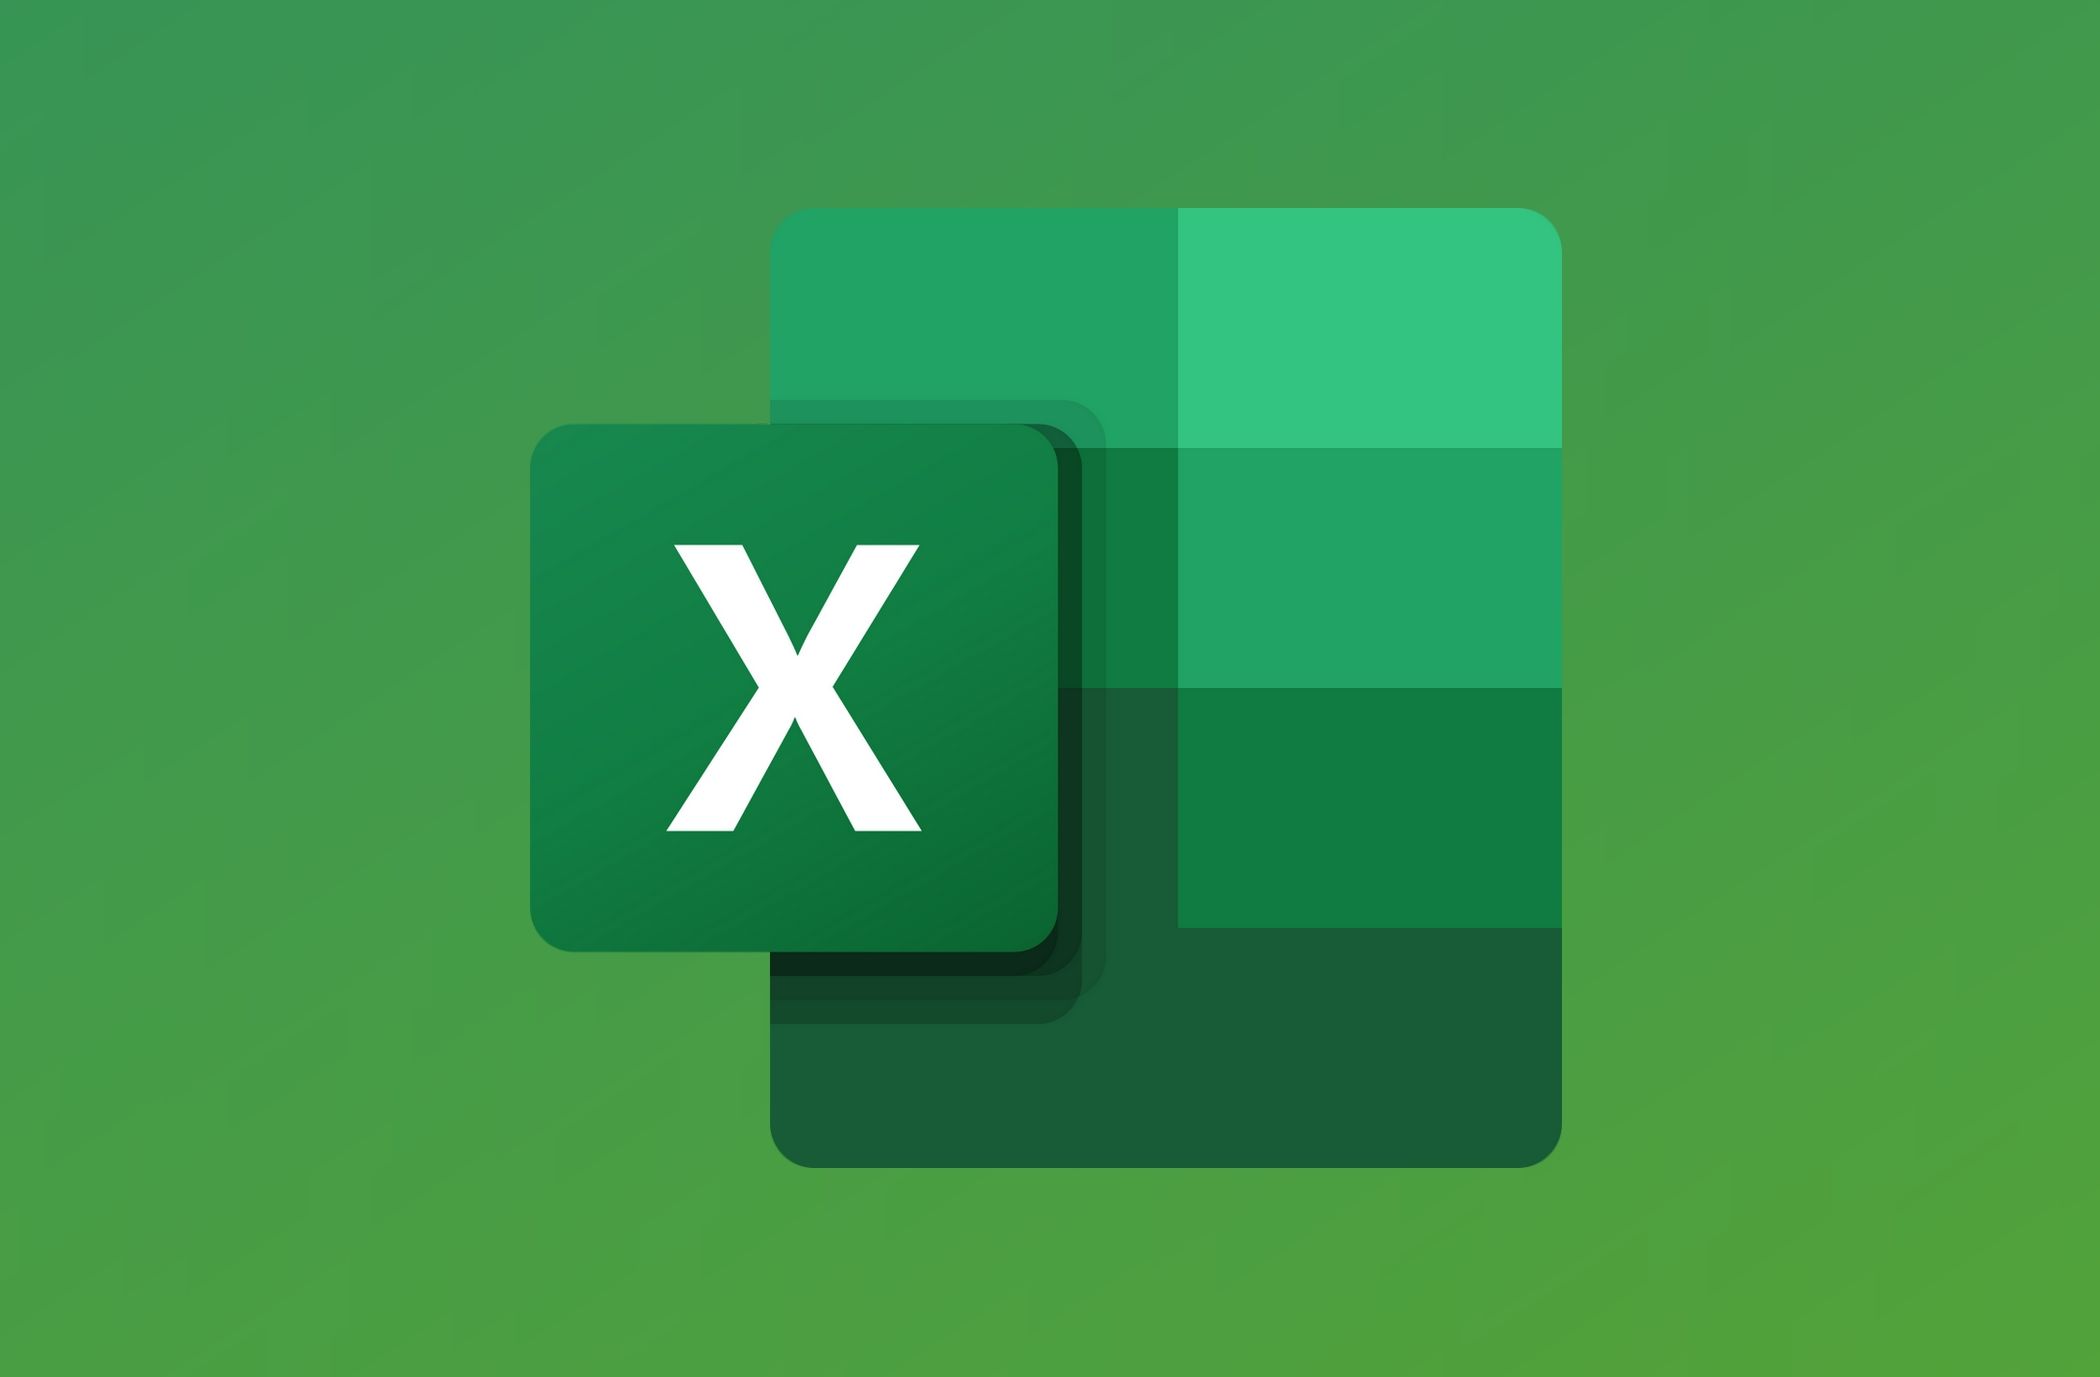 A Microsoft Excel logo over a gradient green background